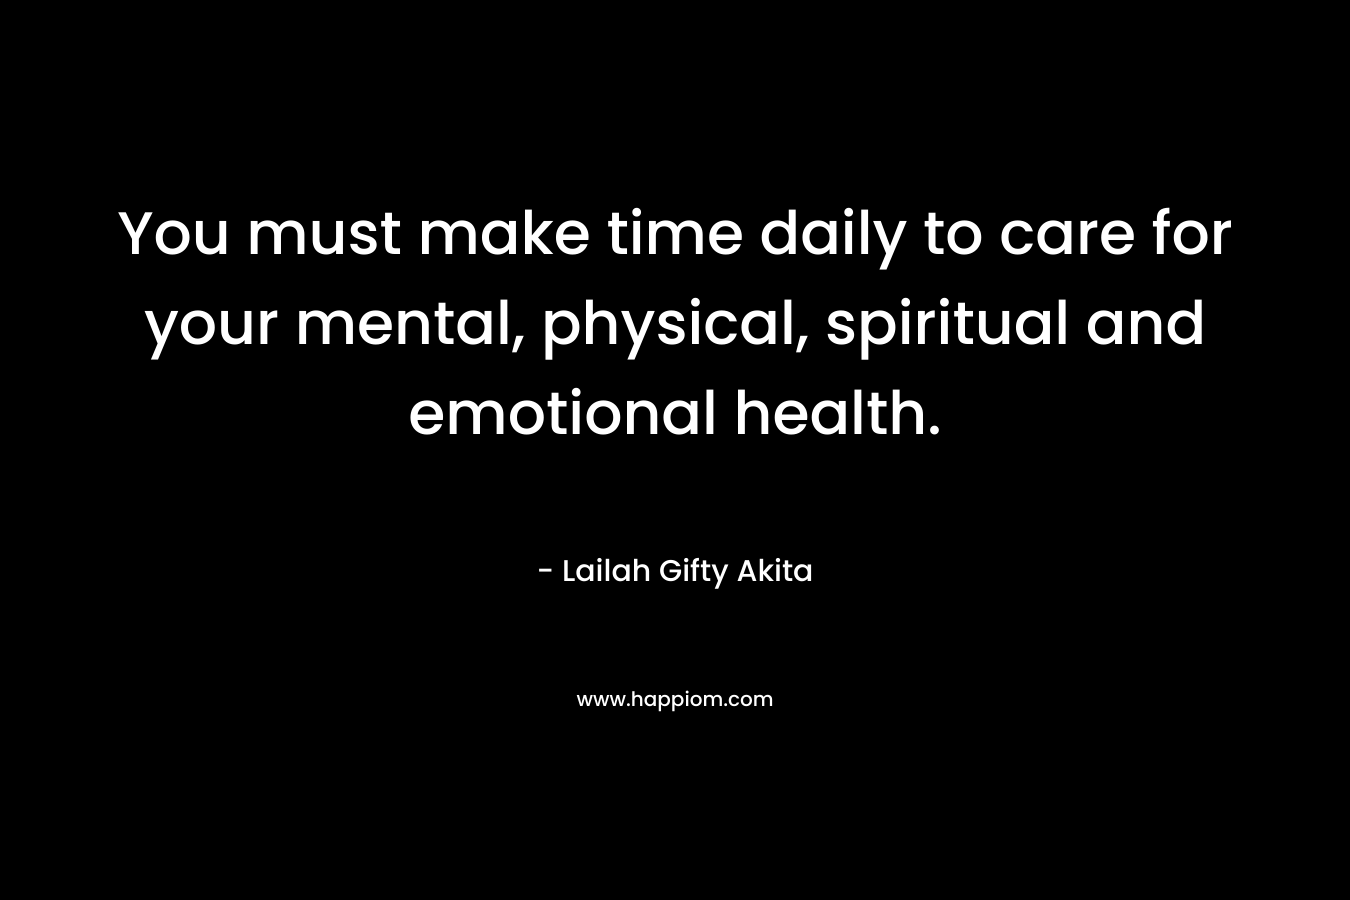 You must make time daily to care for your mental, physical, spiritual and emotional health.